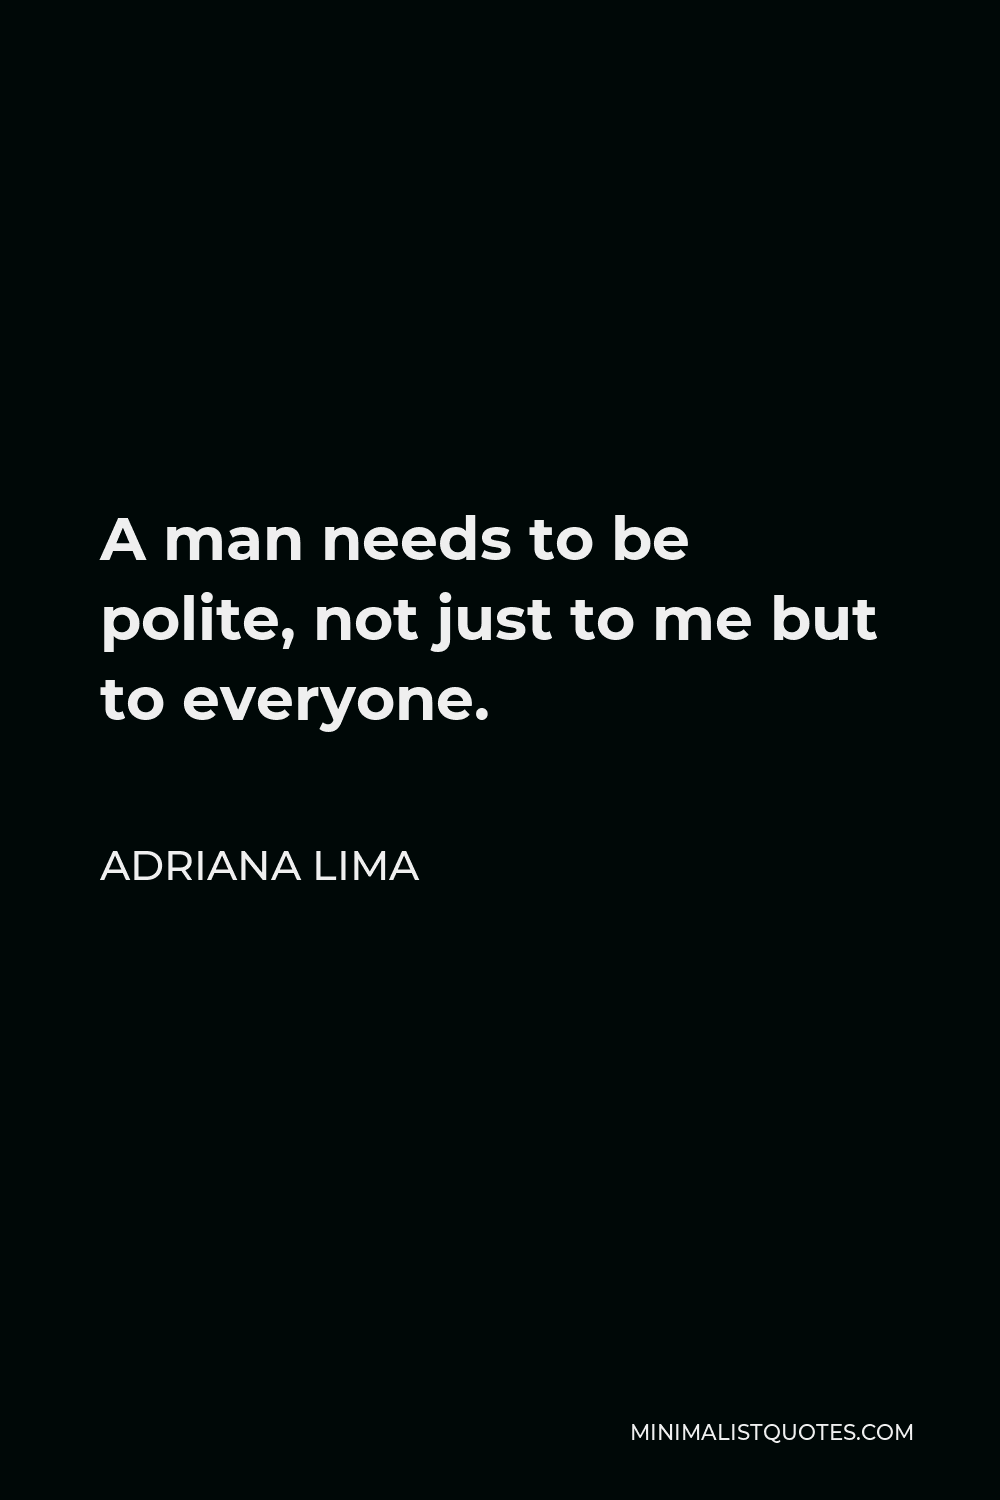 Adriana Lima Quote - A man needs to be polite, not just to me but to everyone.